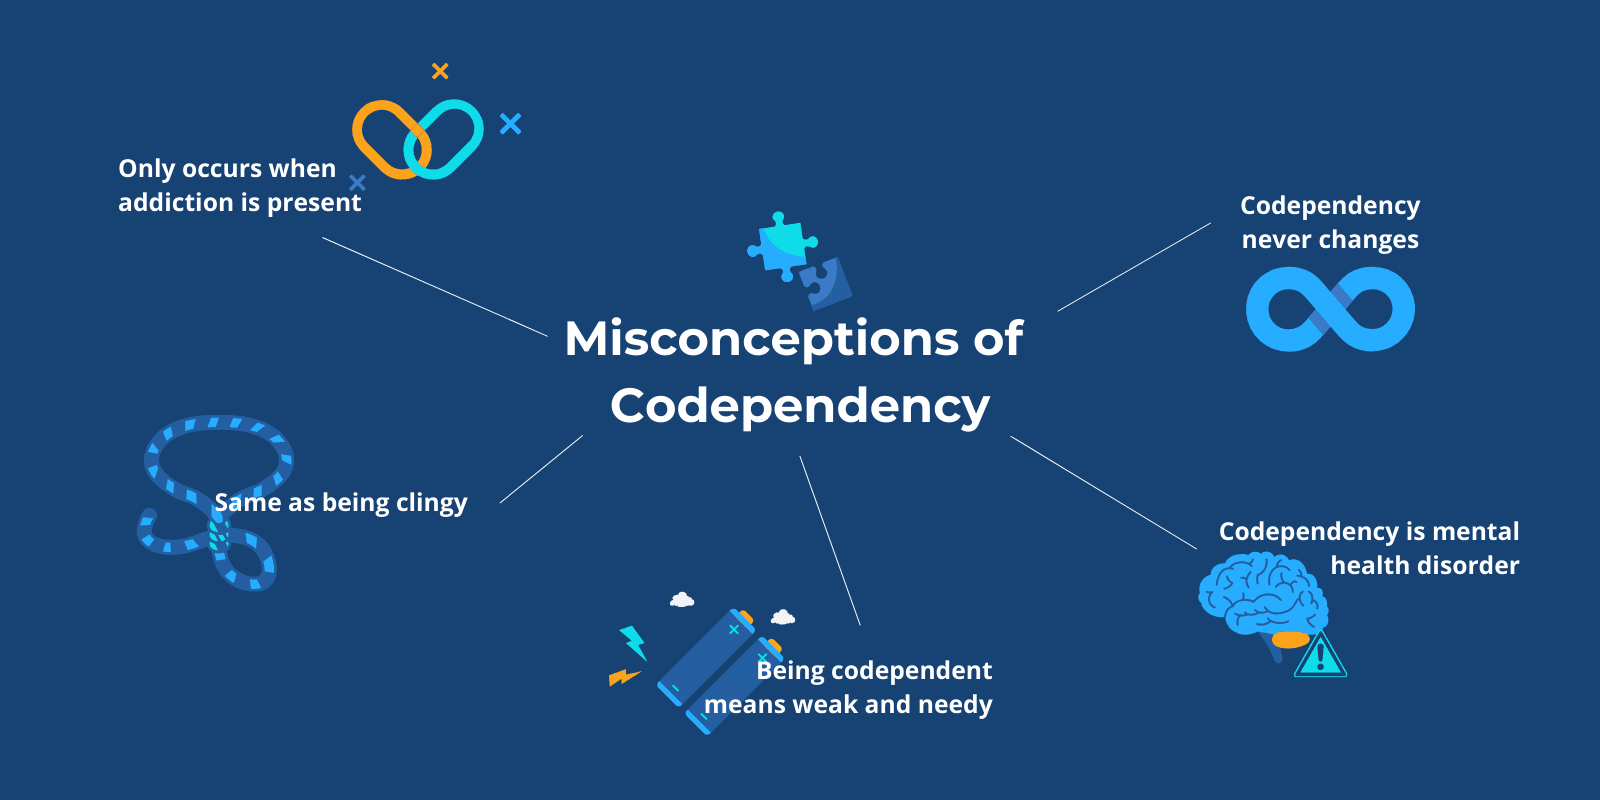 5 Misconception of codependency represented with relevant icons